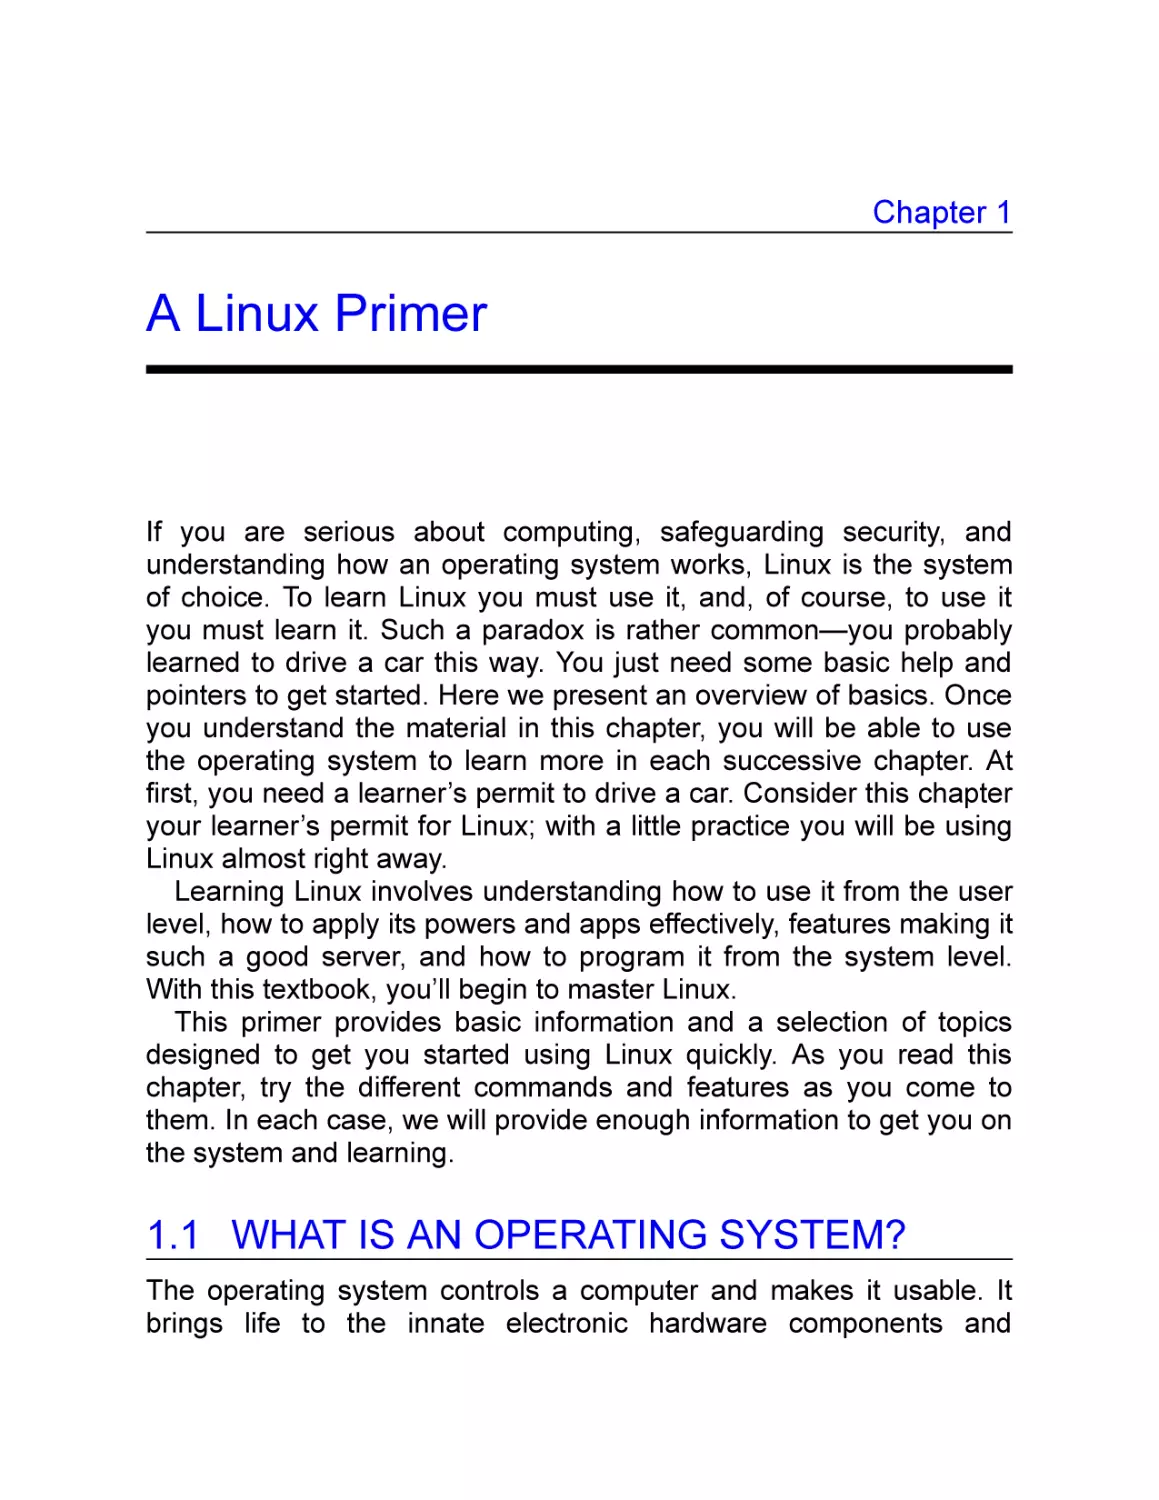 1 A Linux Primer
1.1 What Is an Operating System?